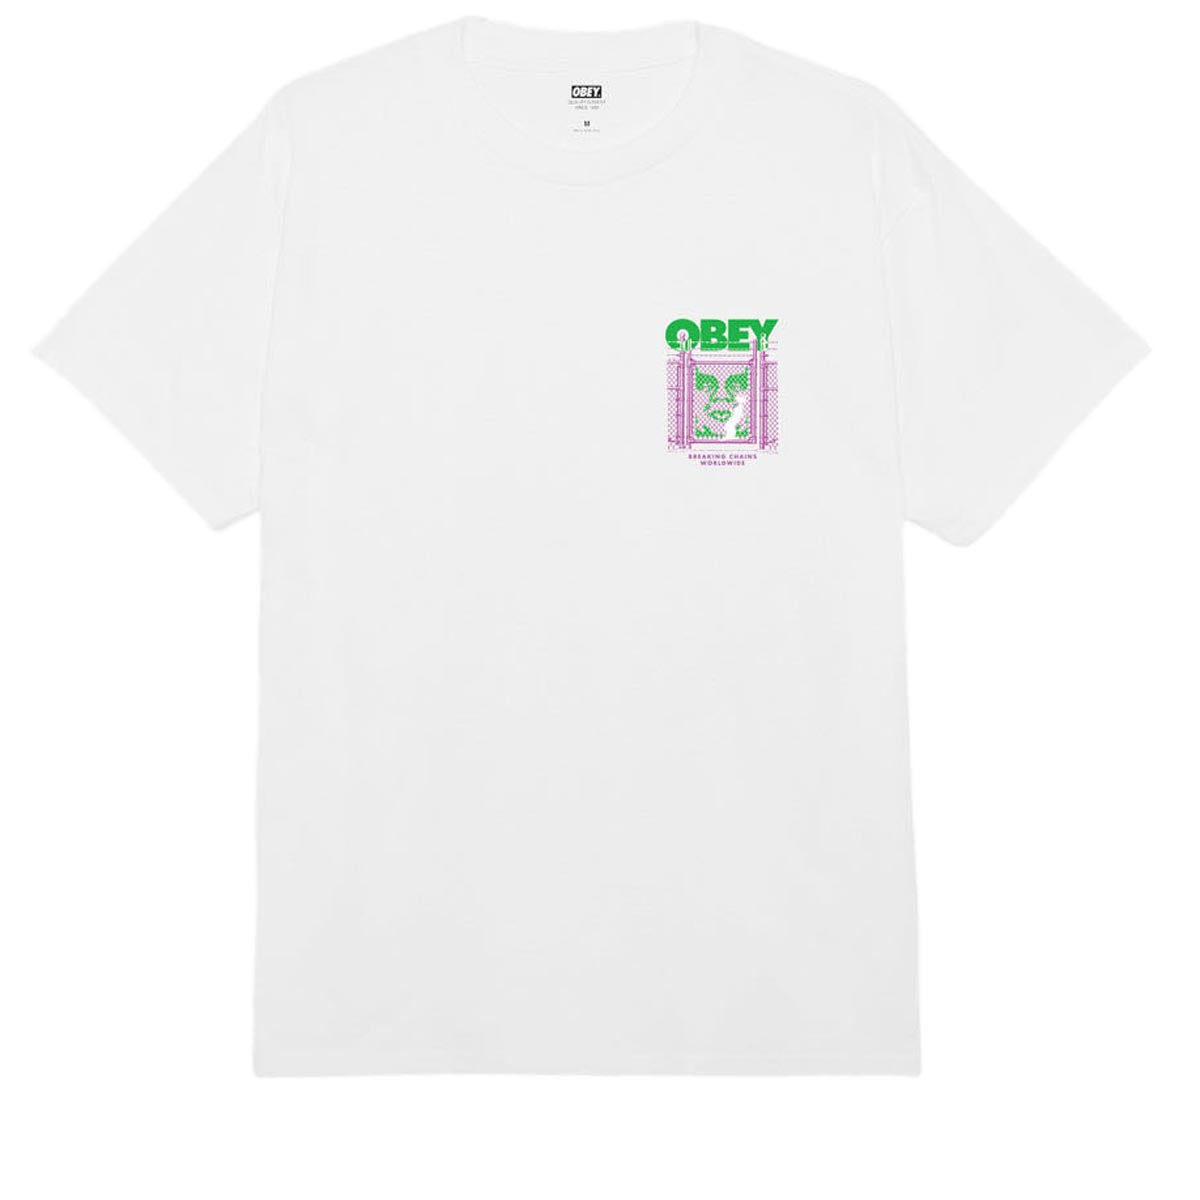 Obey Chain Link Fence Icon T-Shirt - White image 2